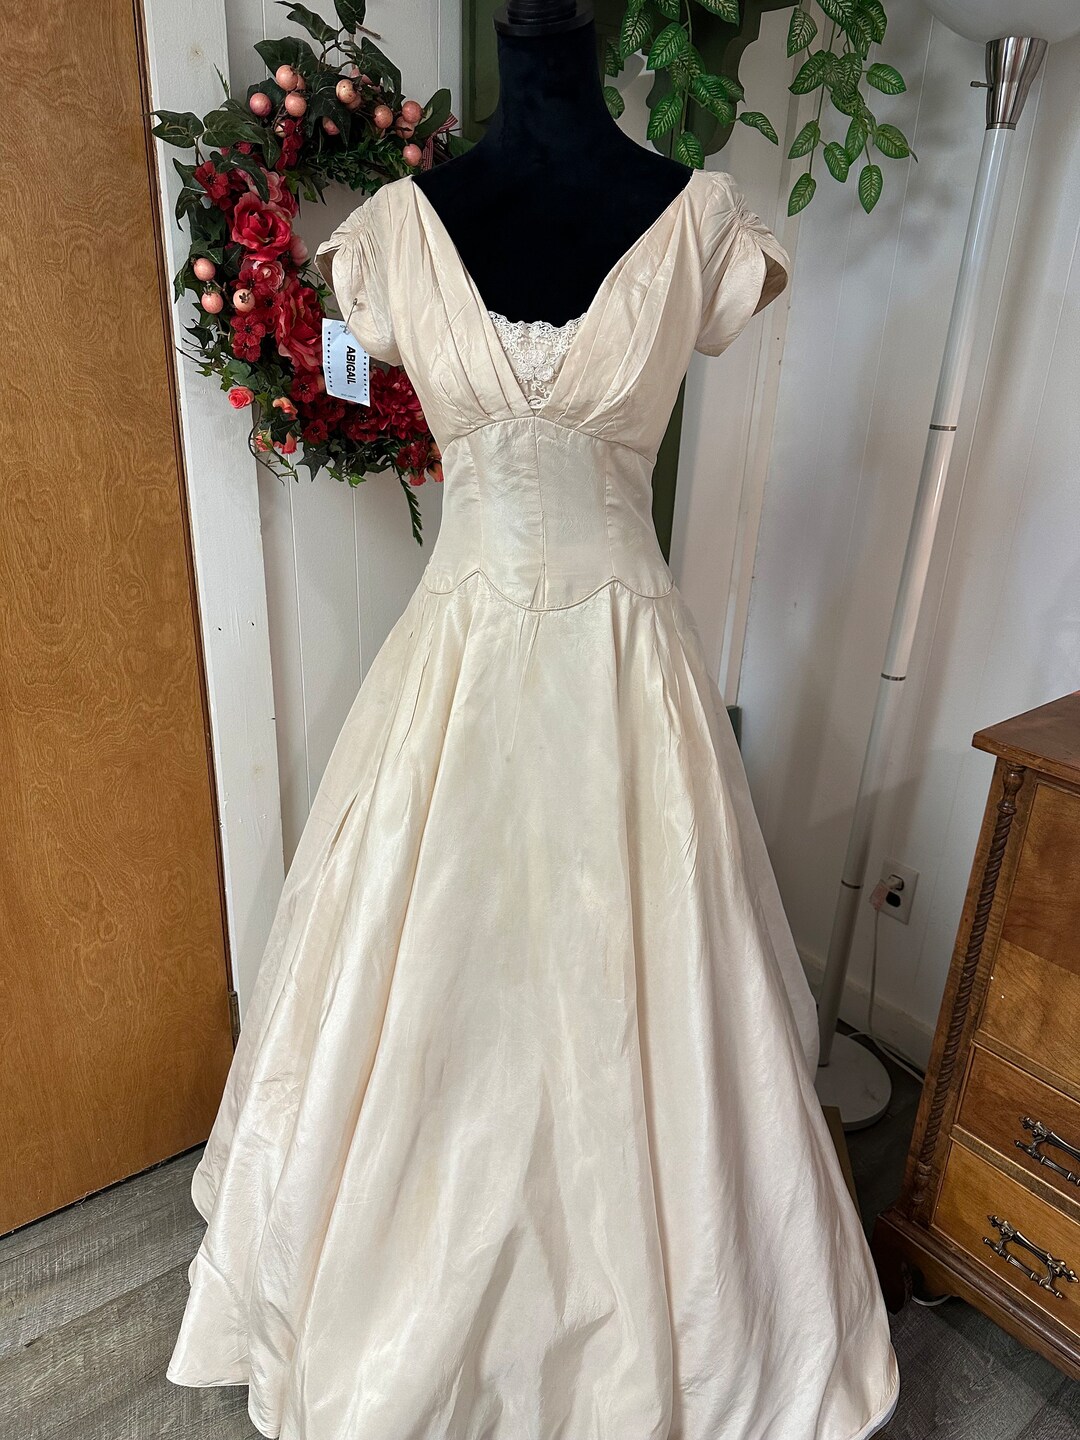 Abigail is a Vintage 1940s Priscilla of Boston Wedding Dress/gown - Etsy